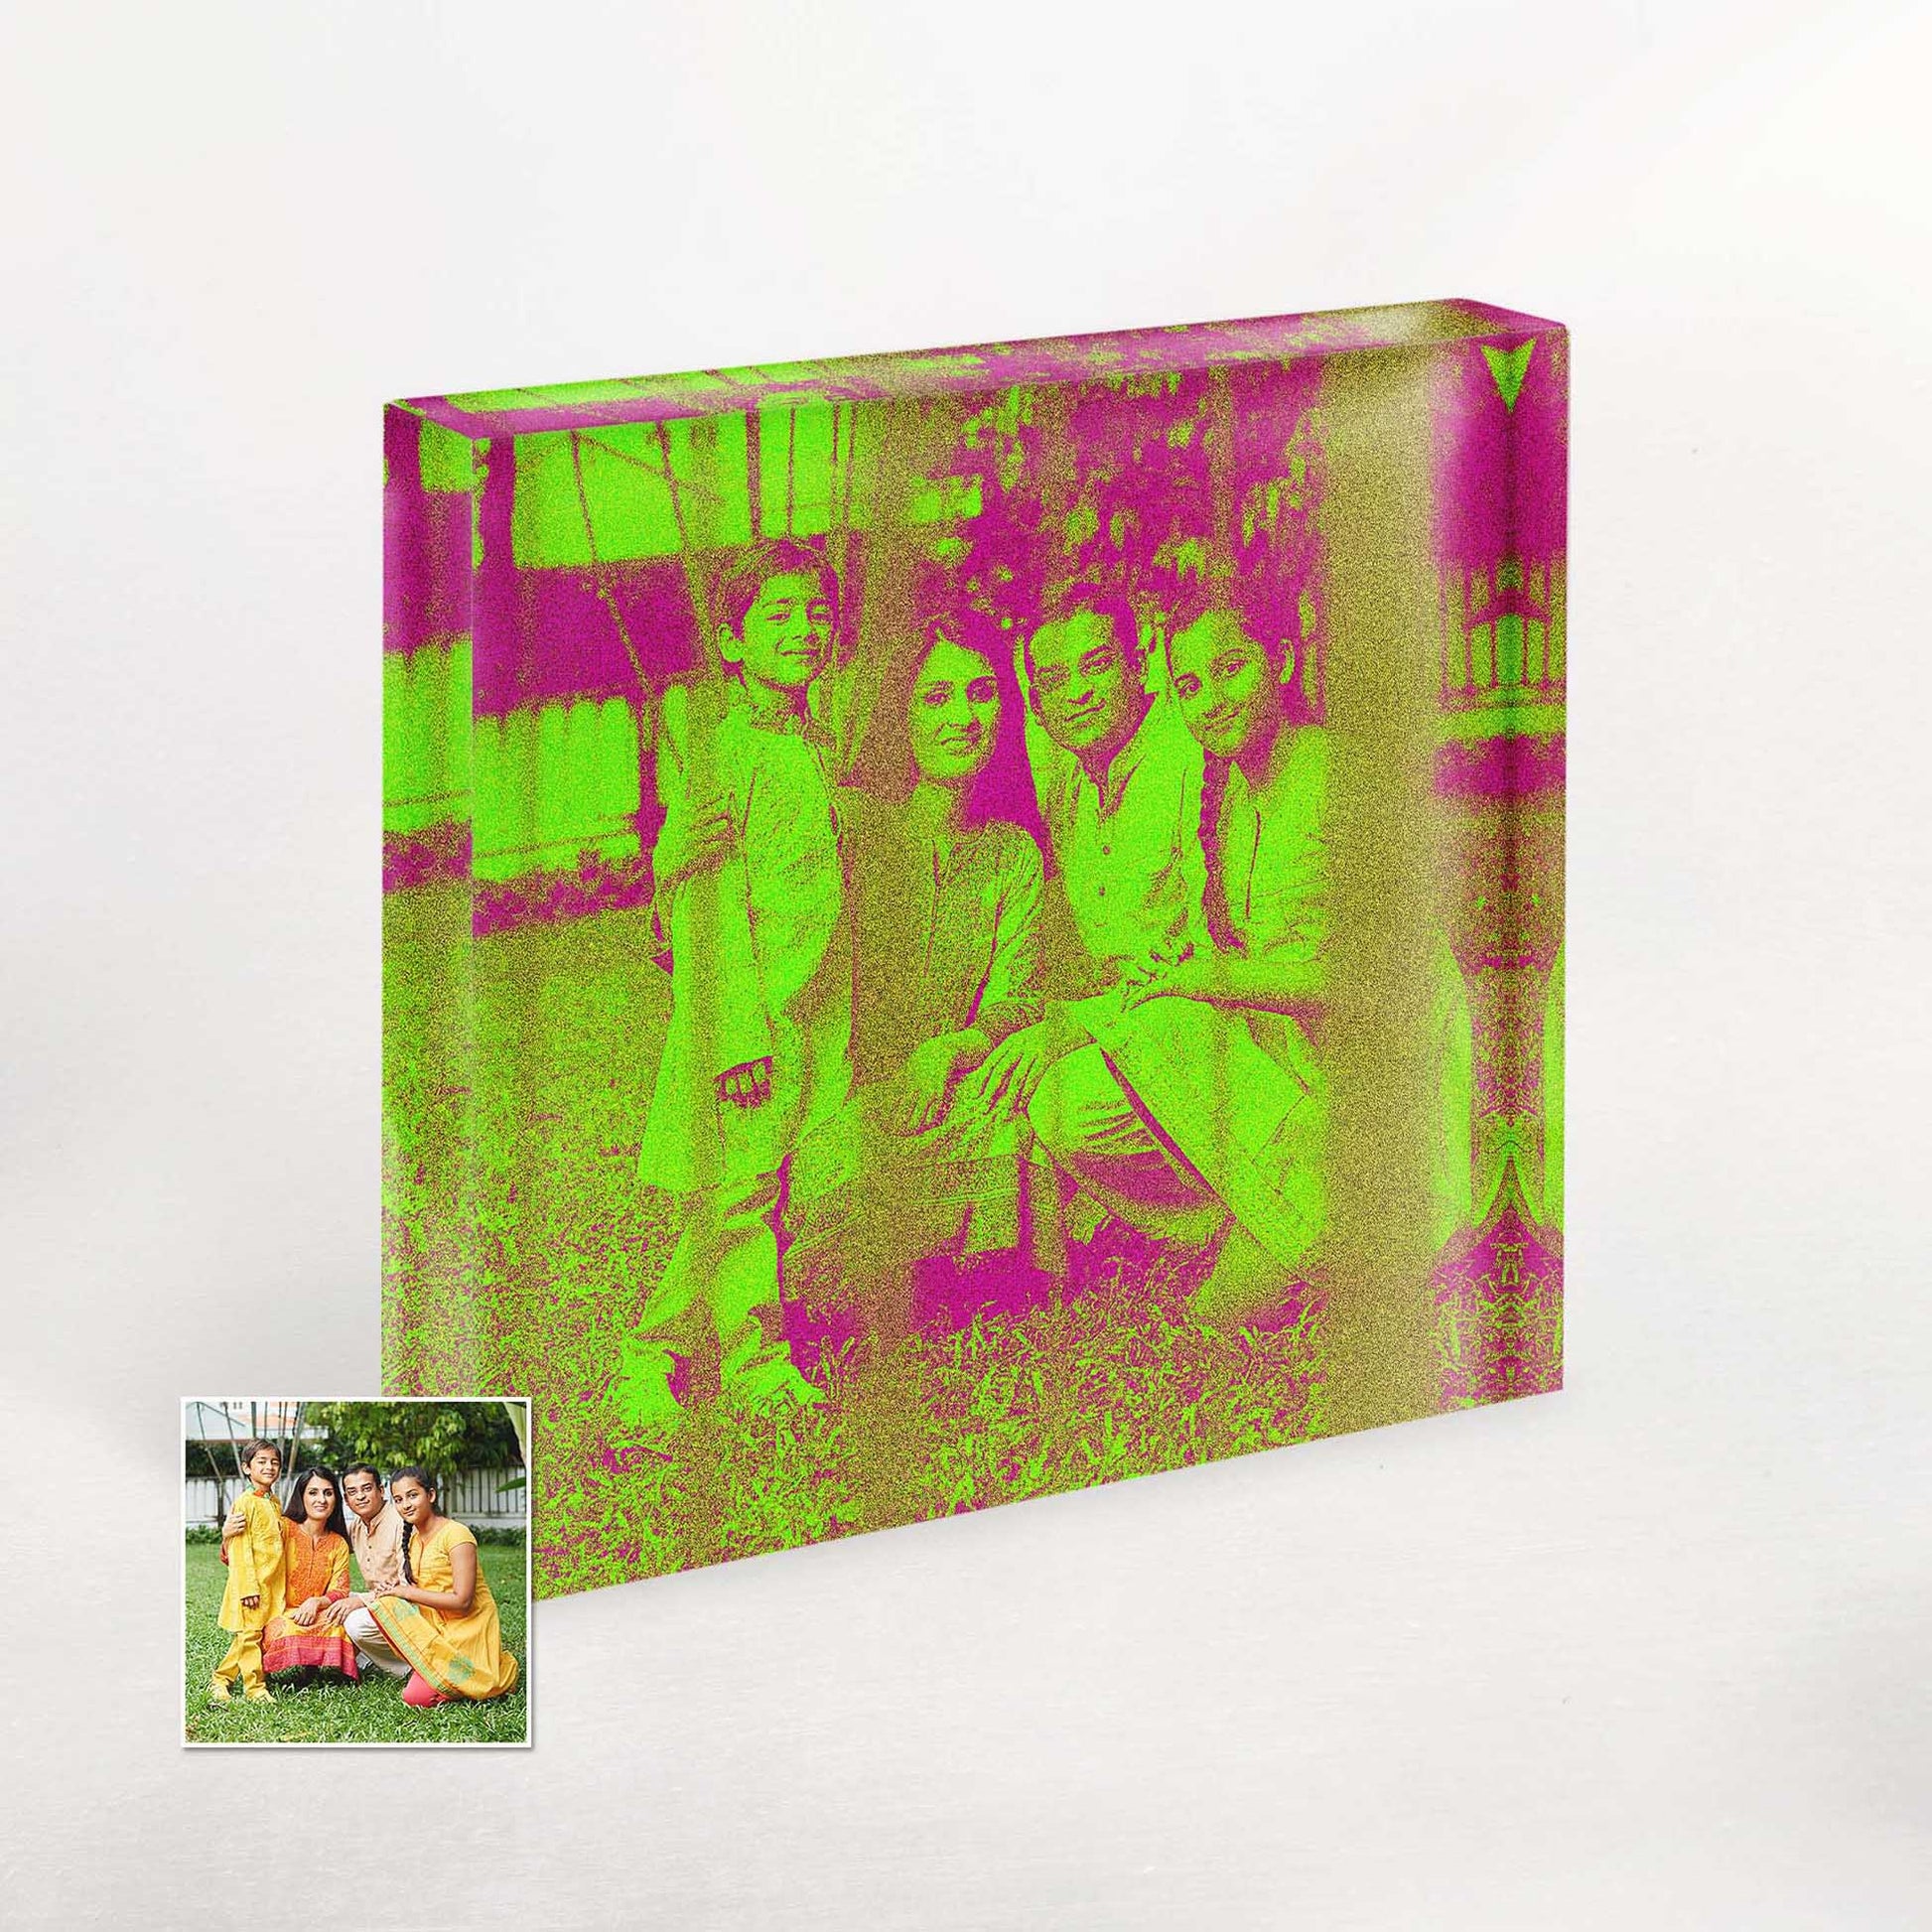 Customise a Hip and Trendy Gift: Personalised Neon Green Acrylic Block Photo. Add a pop of color to your space with our cool and fresh acrylic block photos. Made from your own photo, it's a gift that truly stands out.